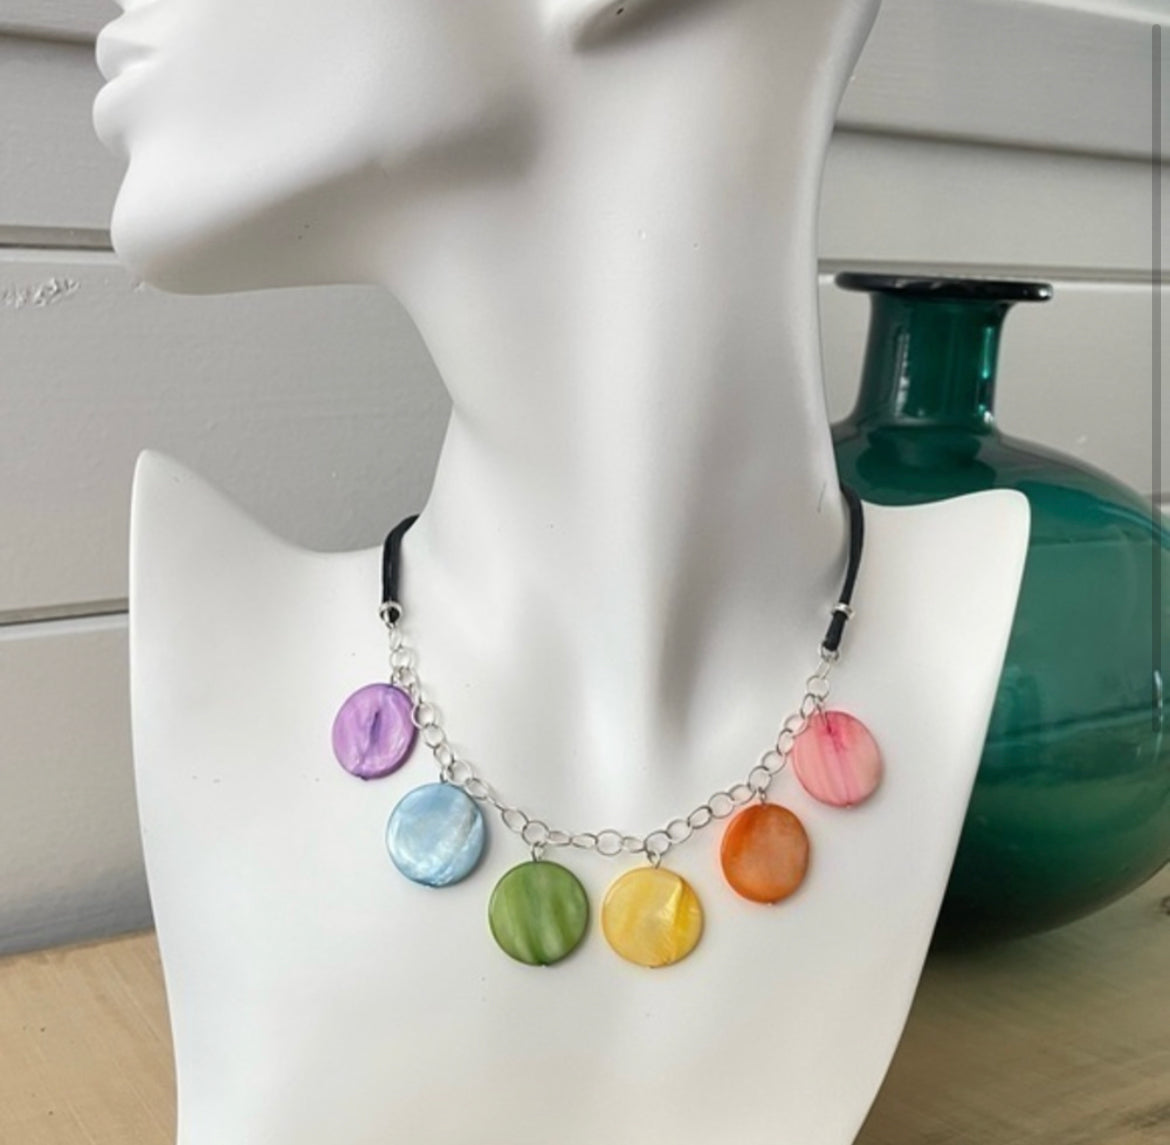 Iridescent Pastel Dangling Shell Necklace 16.5" Rainbow Pride LGBT Ally Double Black Cord Chain Hand Crafted